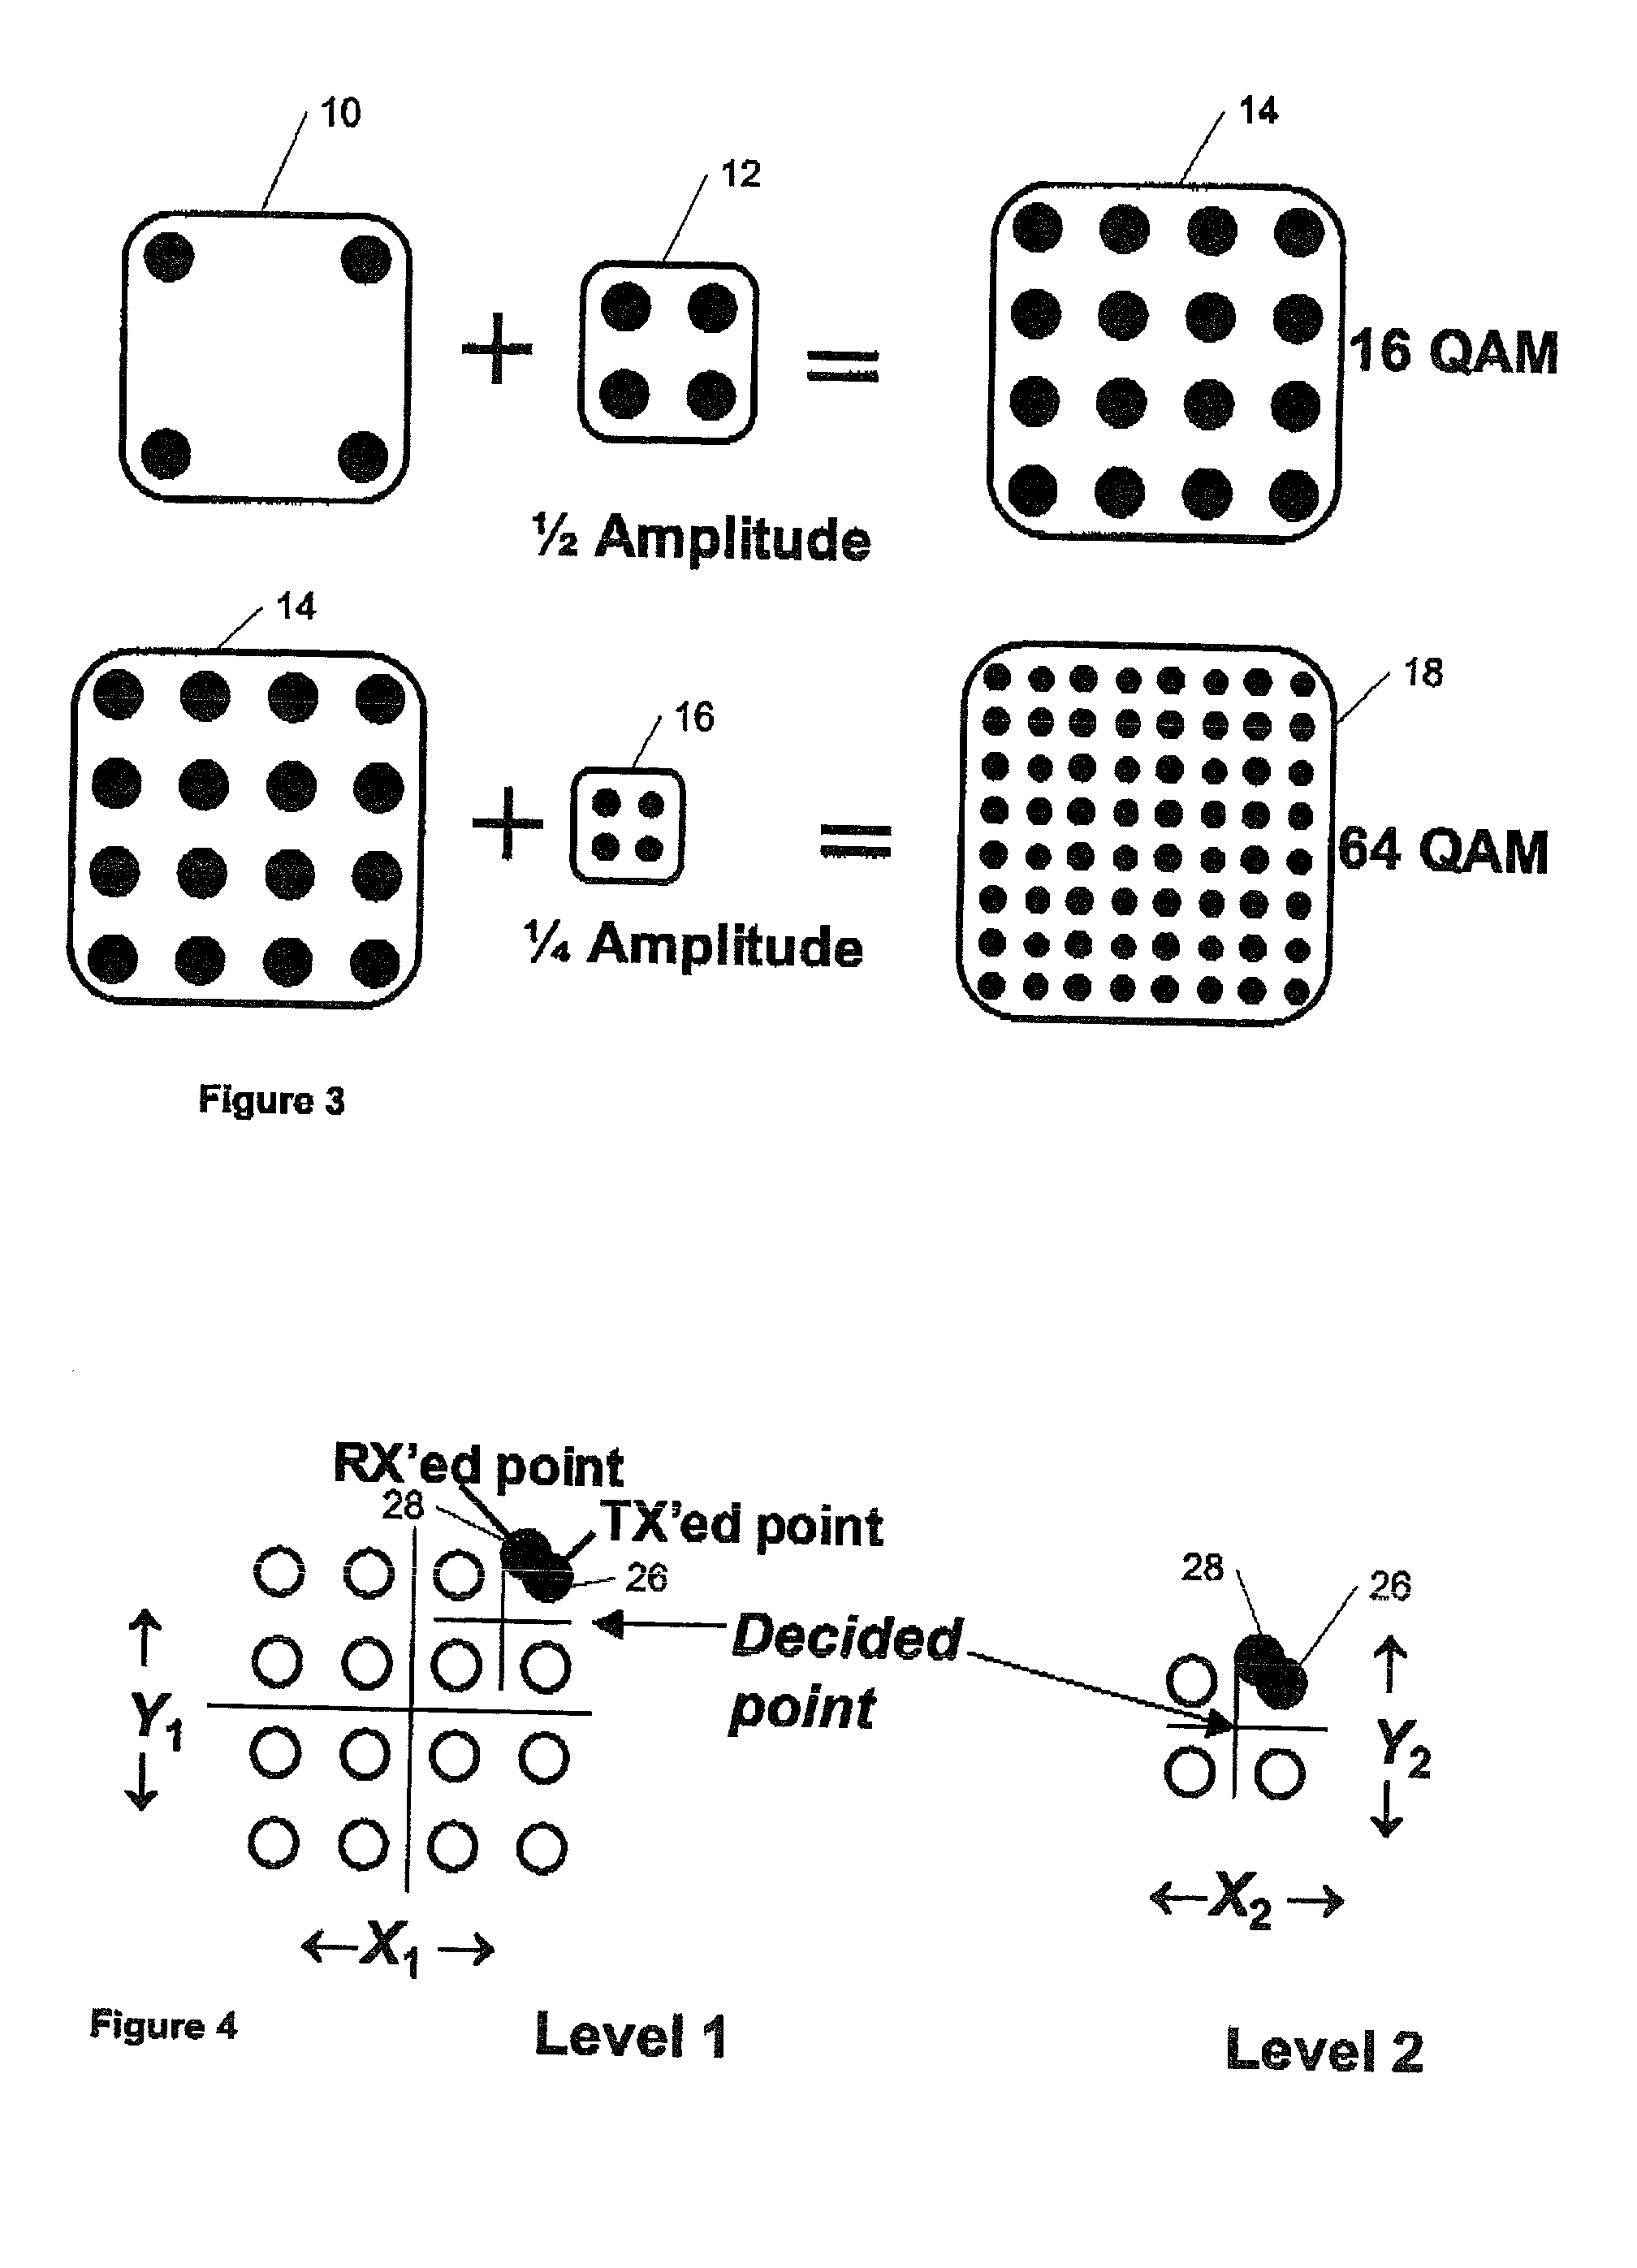 Methods and apparatus for transmitting and receiving data over a communications network in the presence of noise